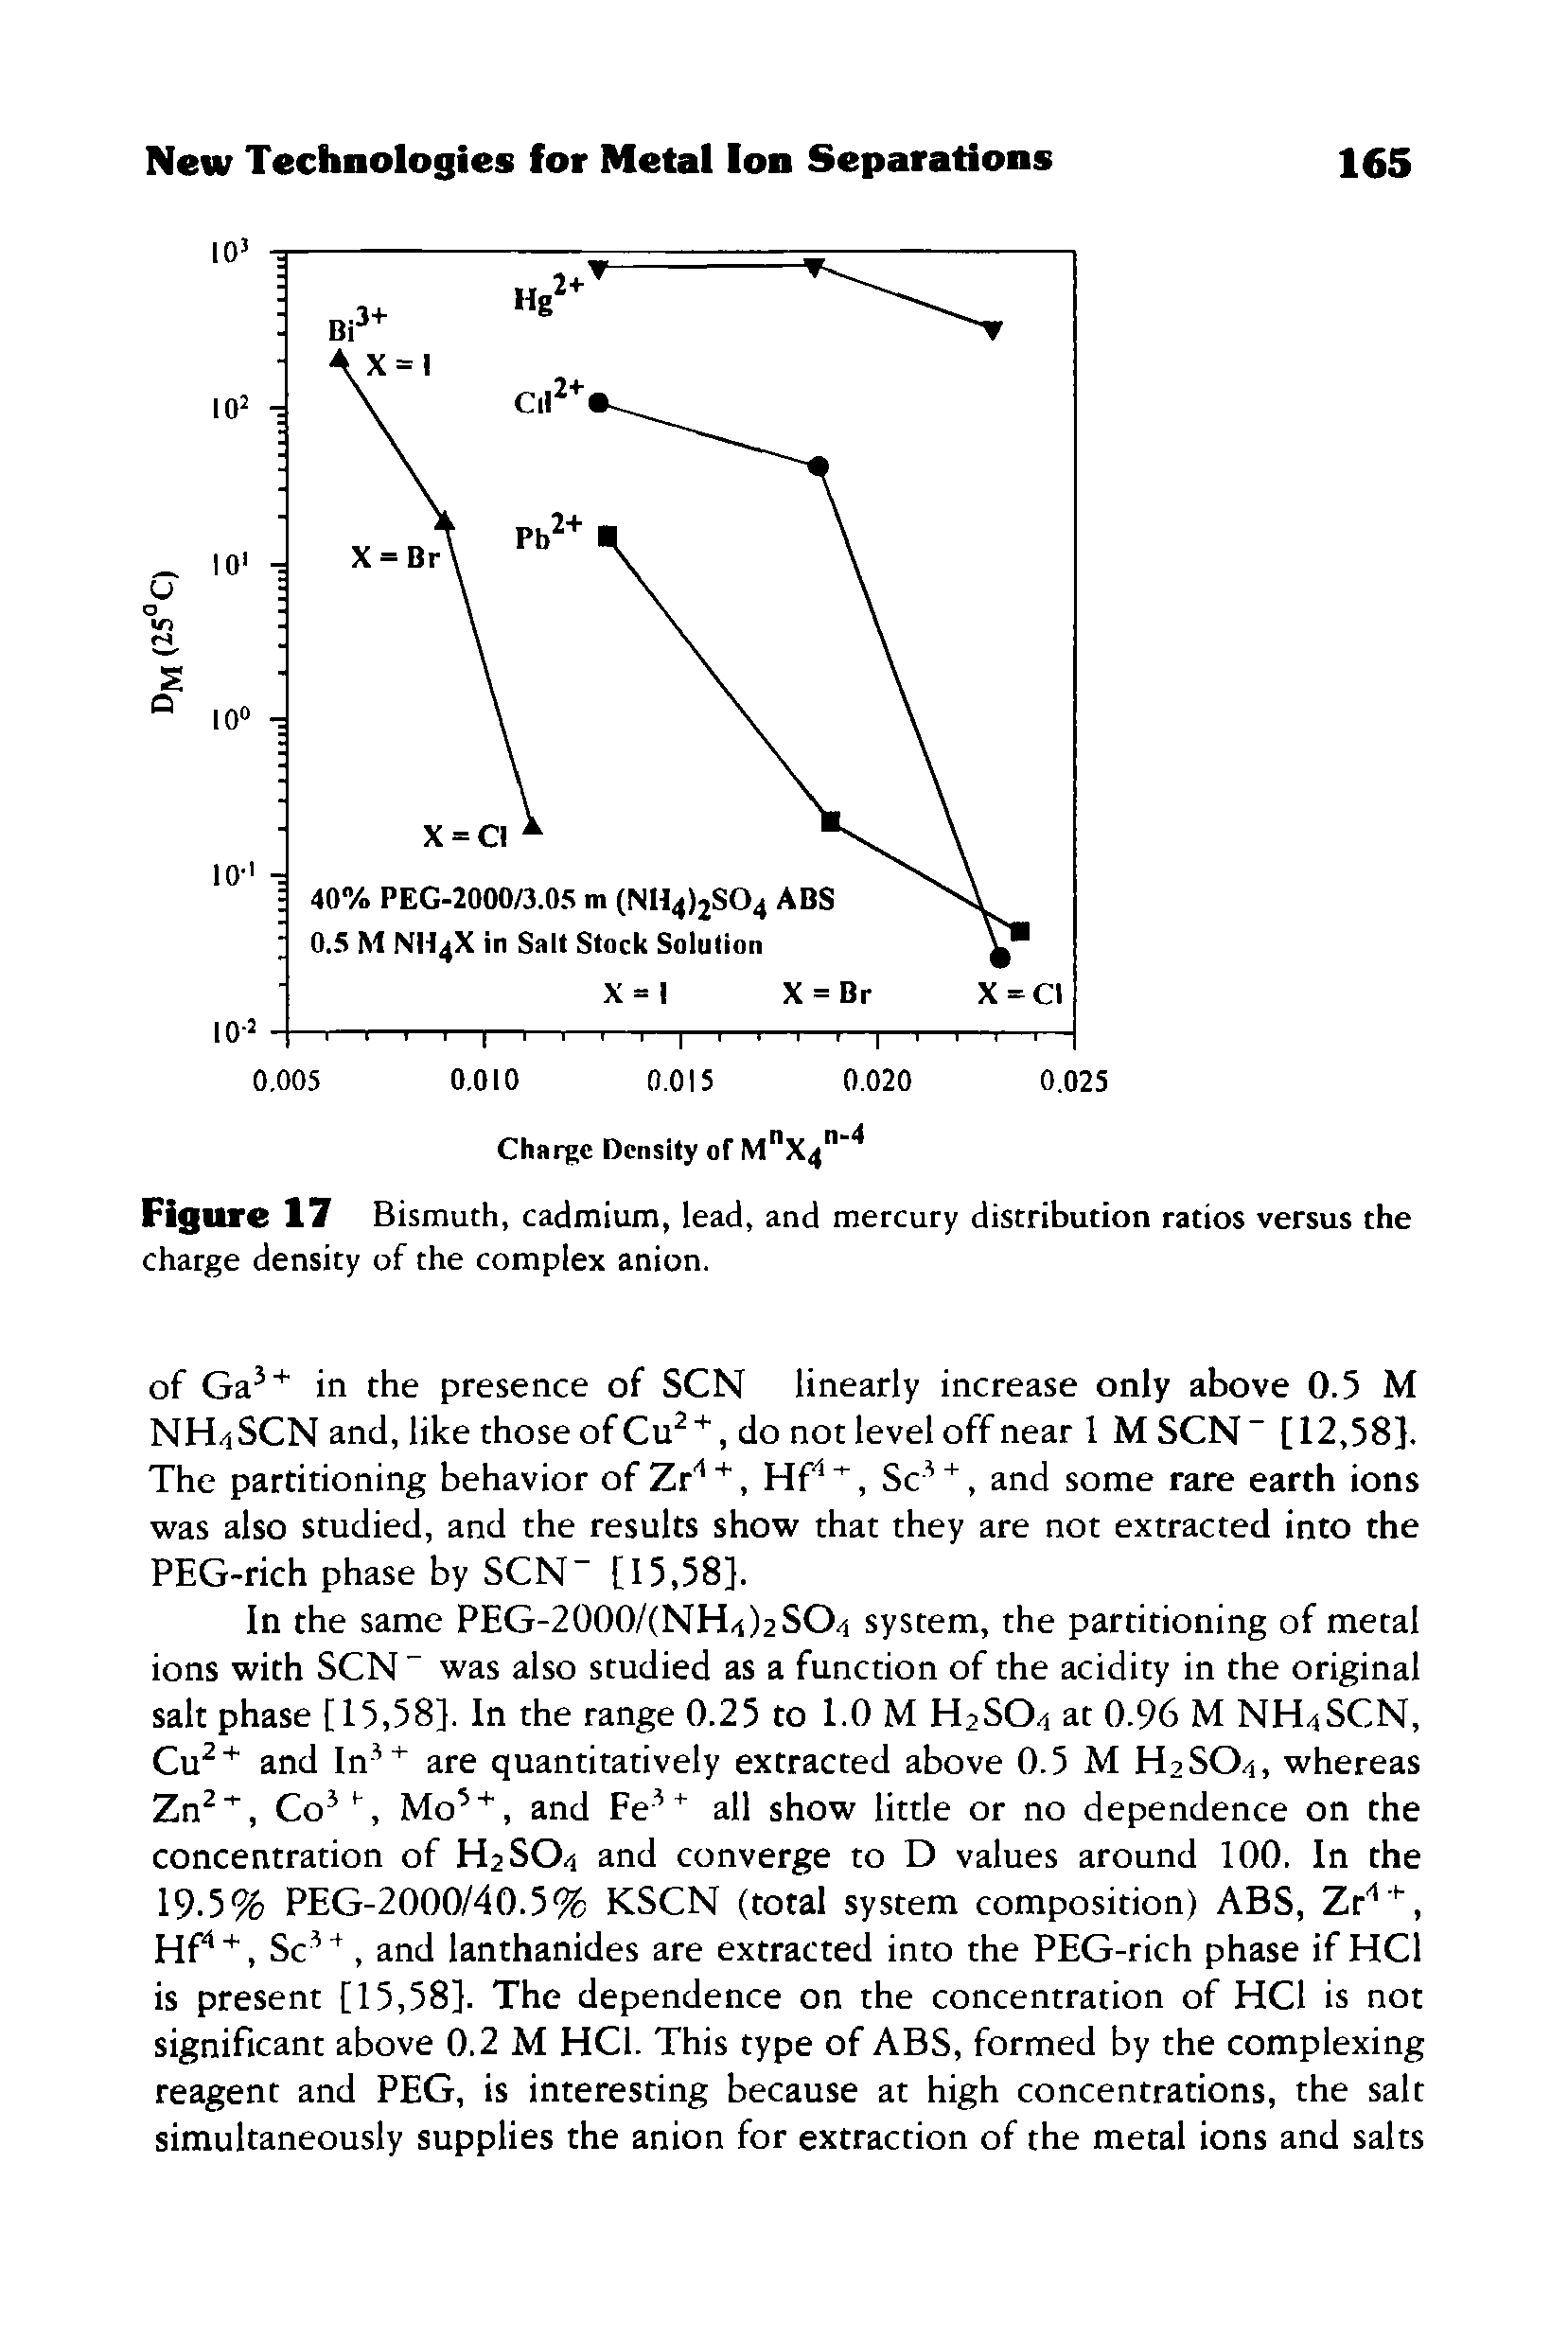 Figure 17 Bismuth, cadmium, lead, and mercury distribution ratios versus the charge density of the complex anion.